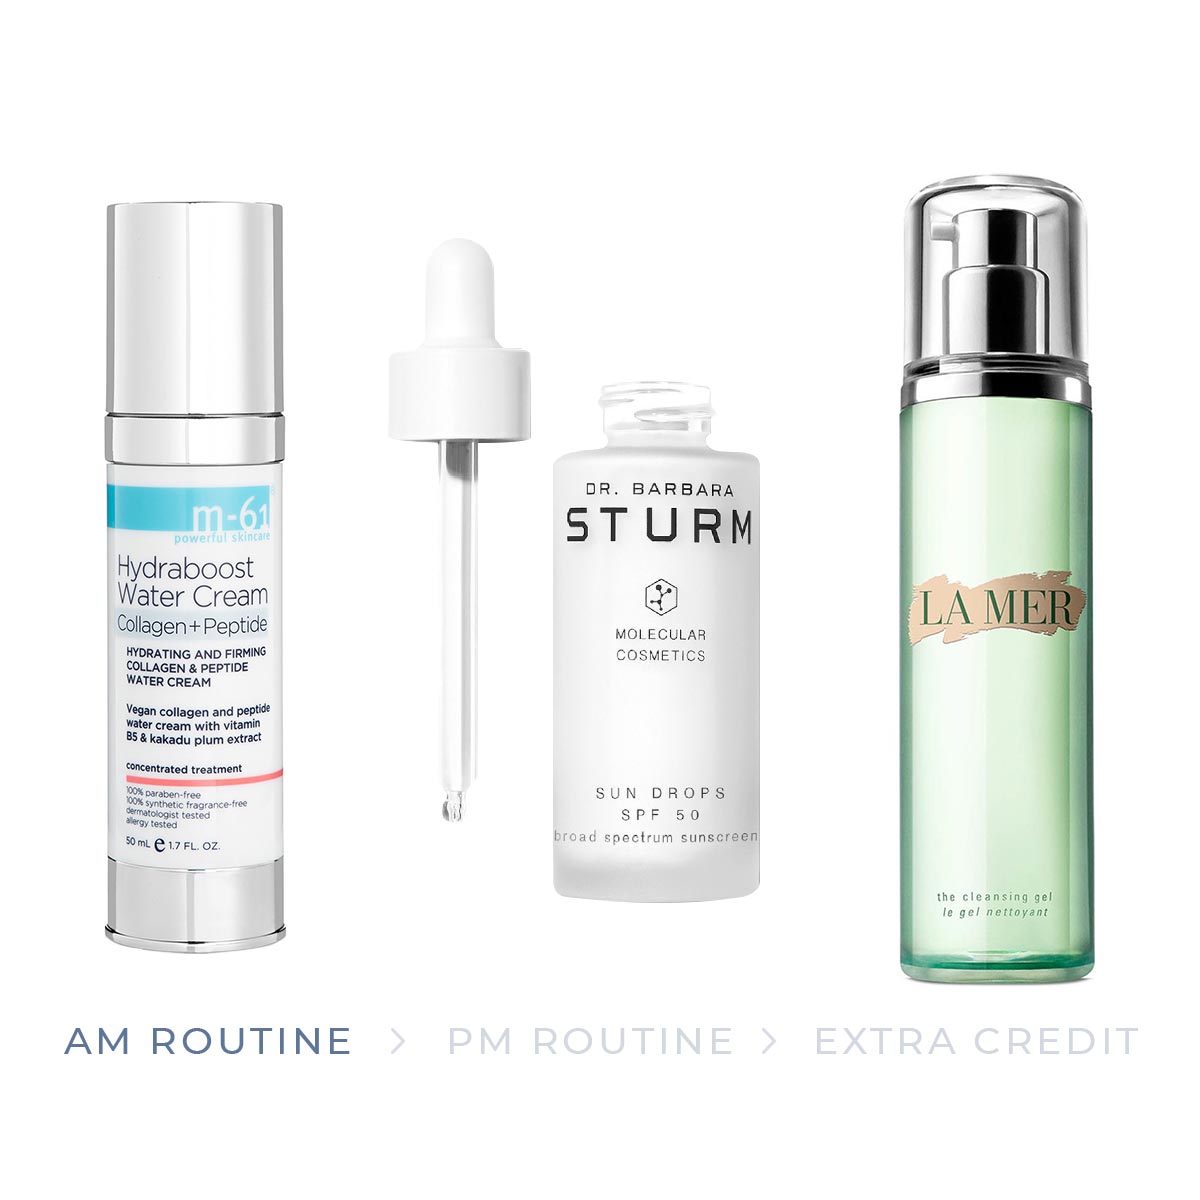 The products for the AM part of the normal skin skincare routine